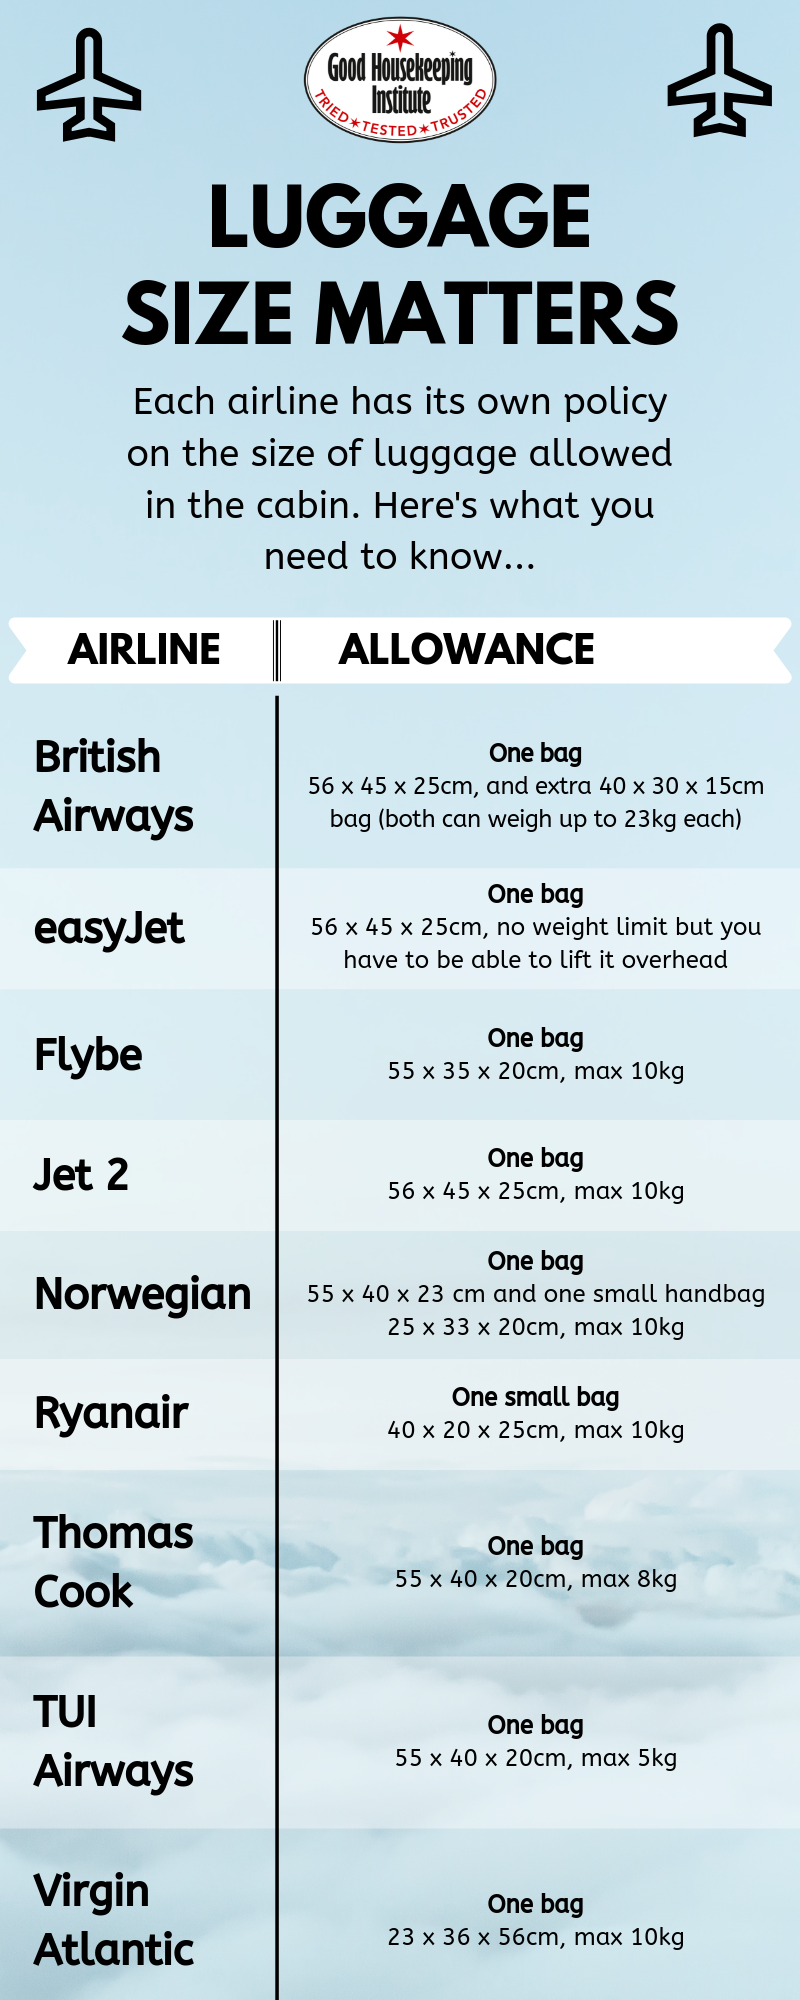 Each airline has its own policy on the size of luggage allowed in the cabin. Here's what you need to know...